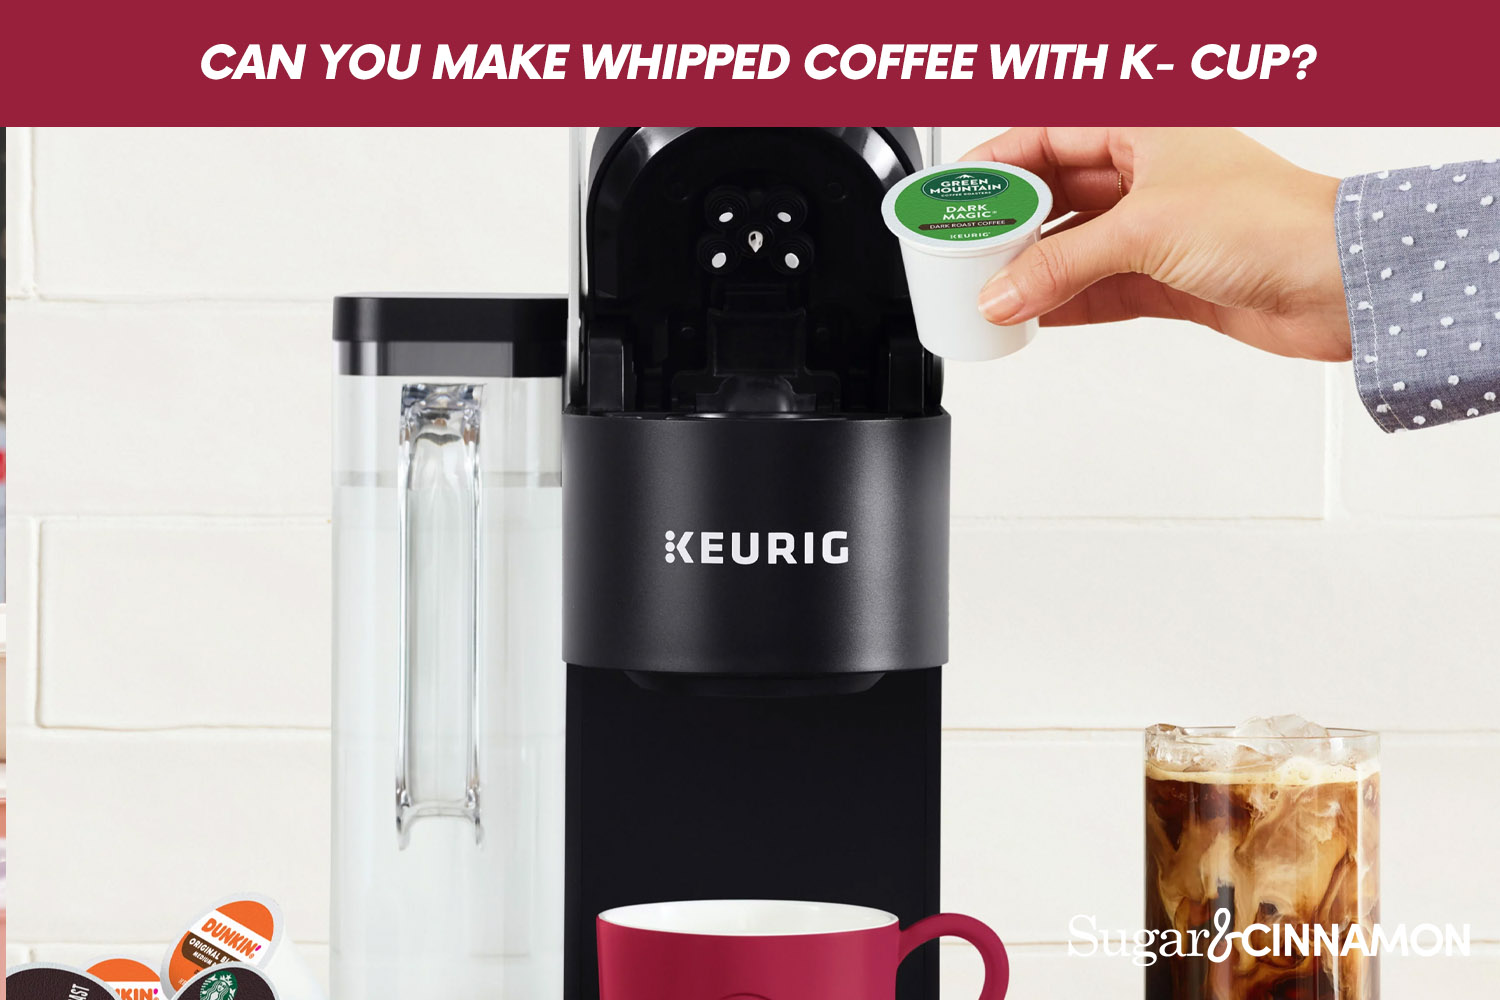 Can You Make Whipped Coffee With K- Cup?